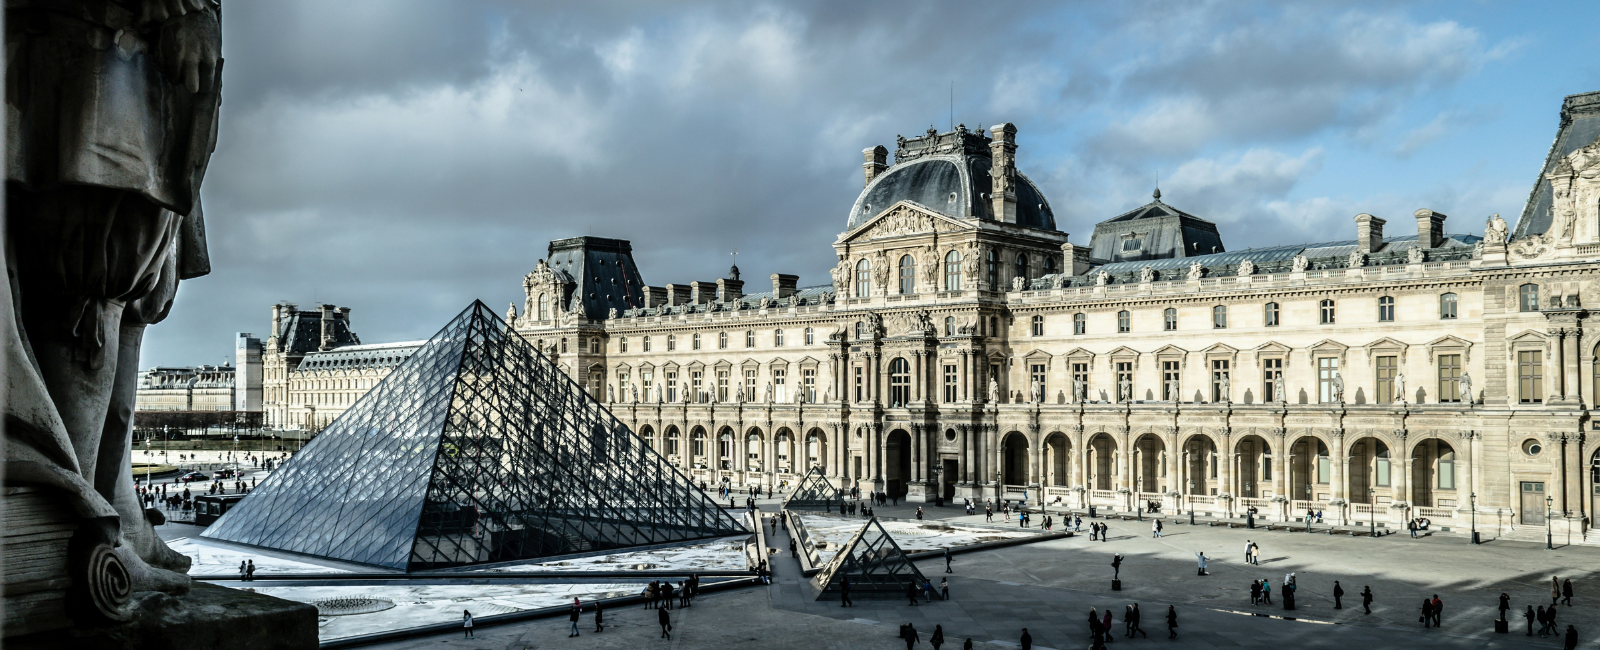 Outside of the Louvre